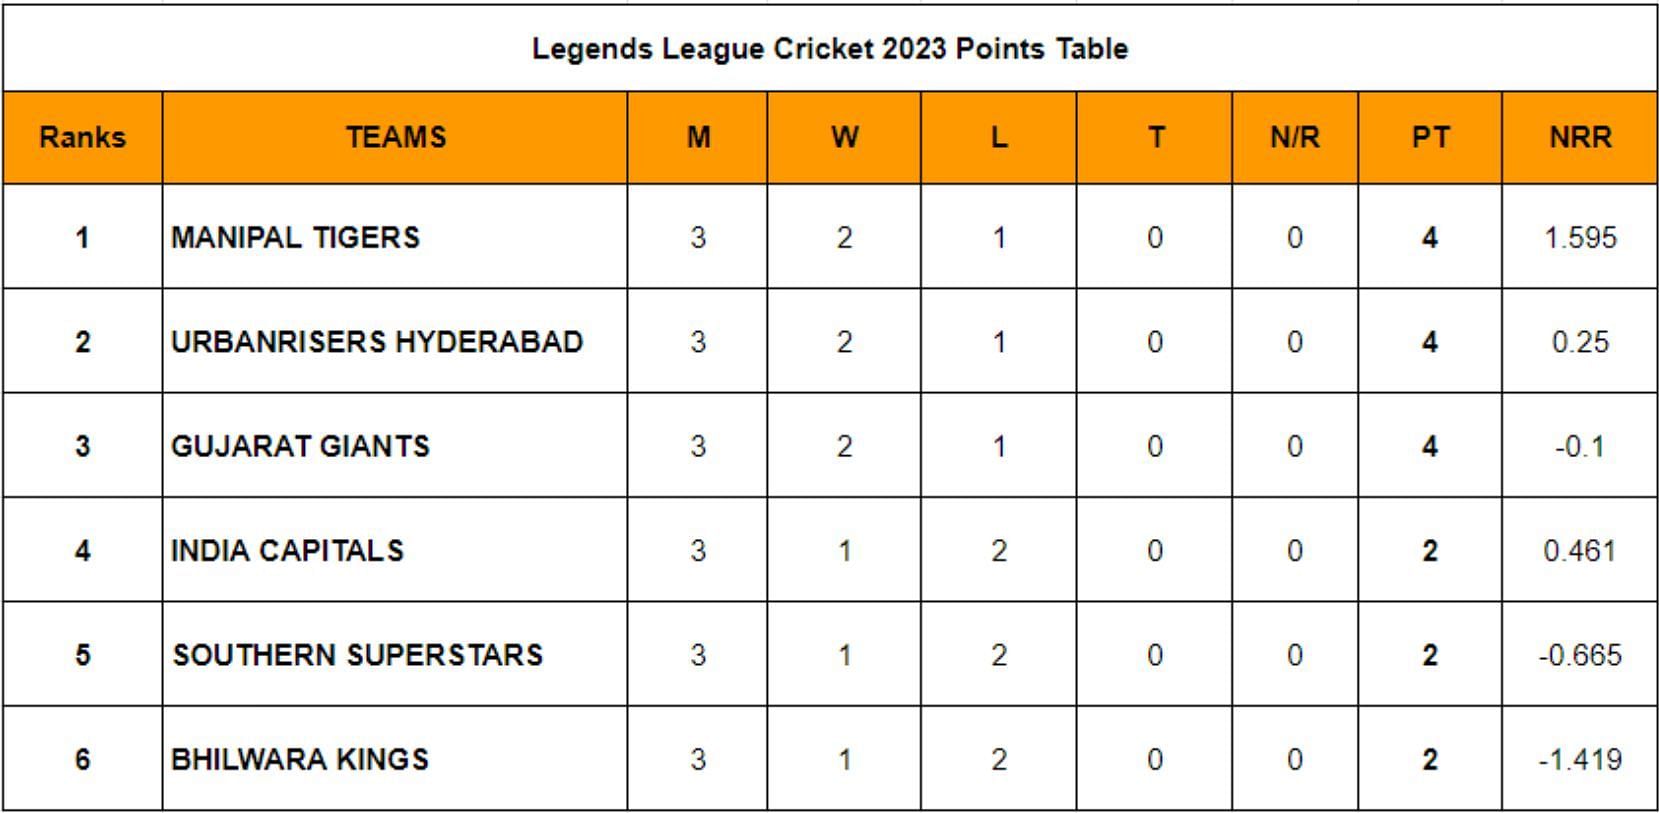 Legends League Cricket 2023 Points Table Updated standings after